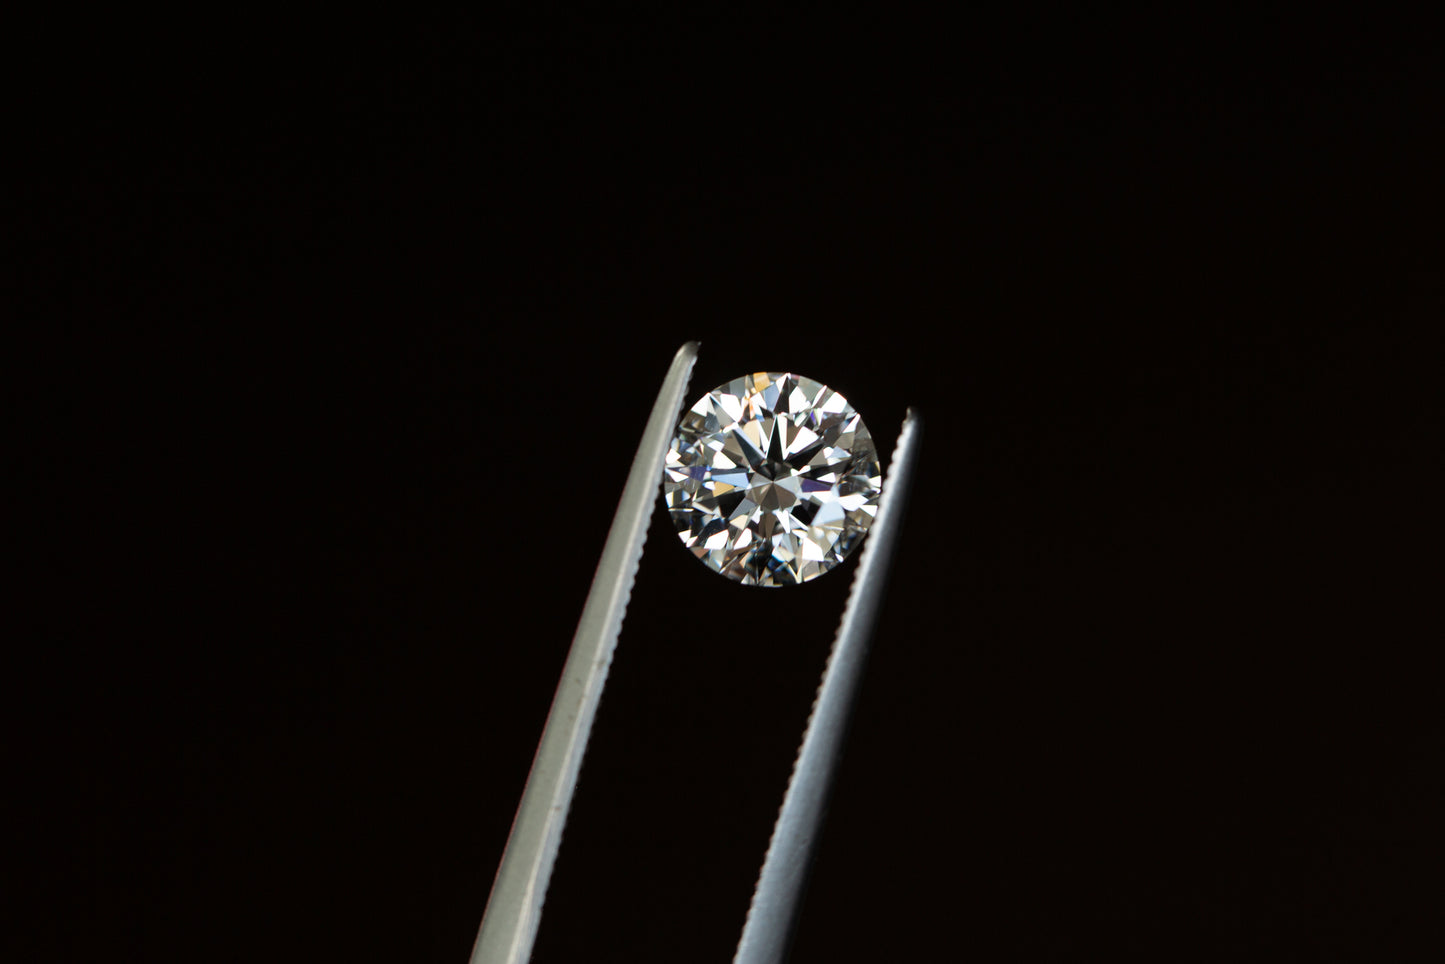 Load image into Gallery viewer, 1.27ct round lab diamond, D/VVS2
